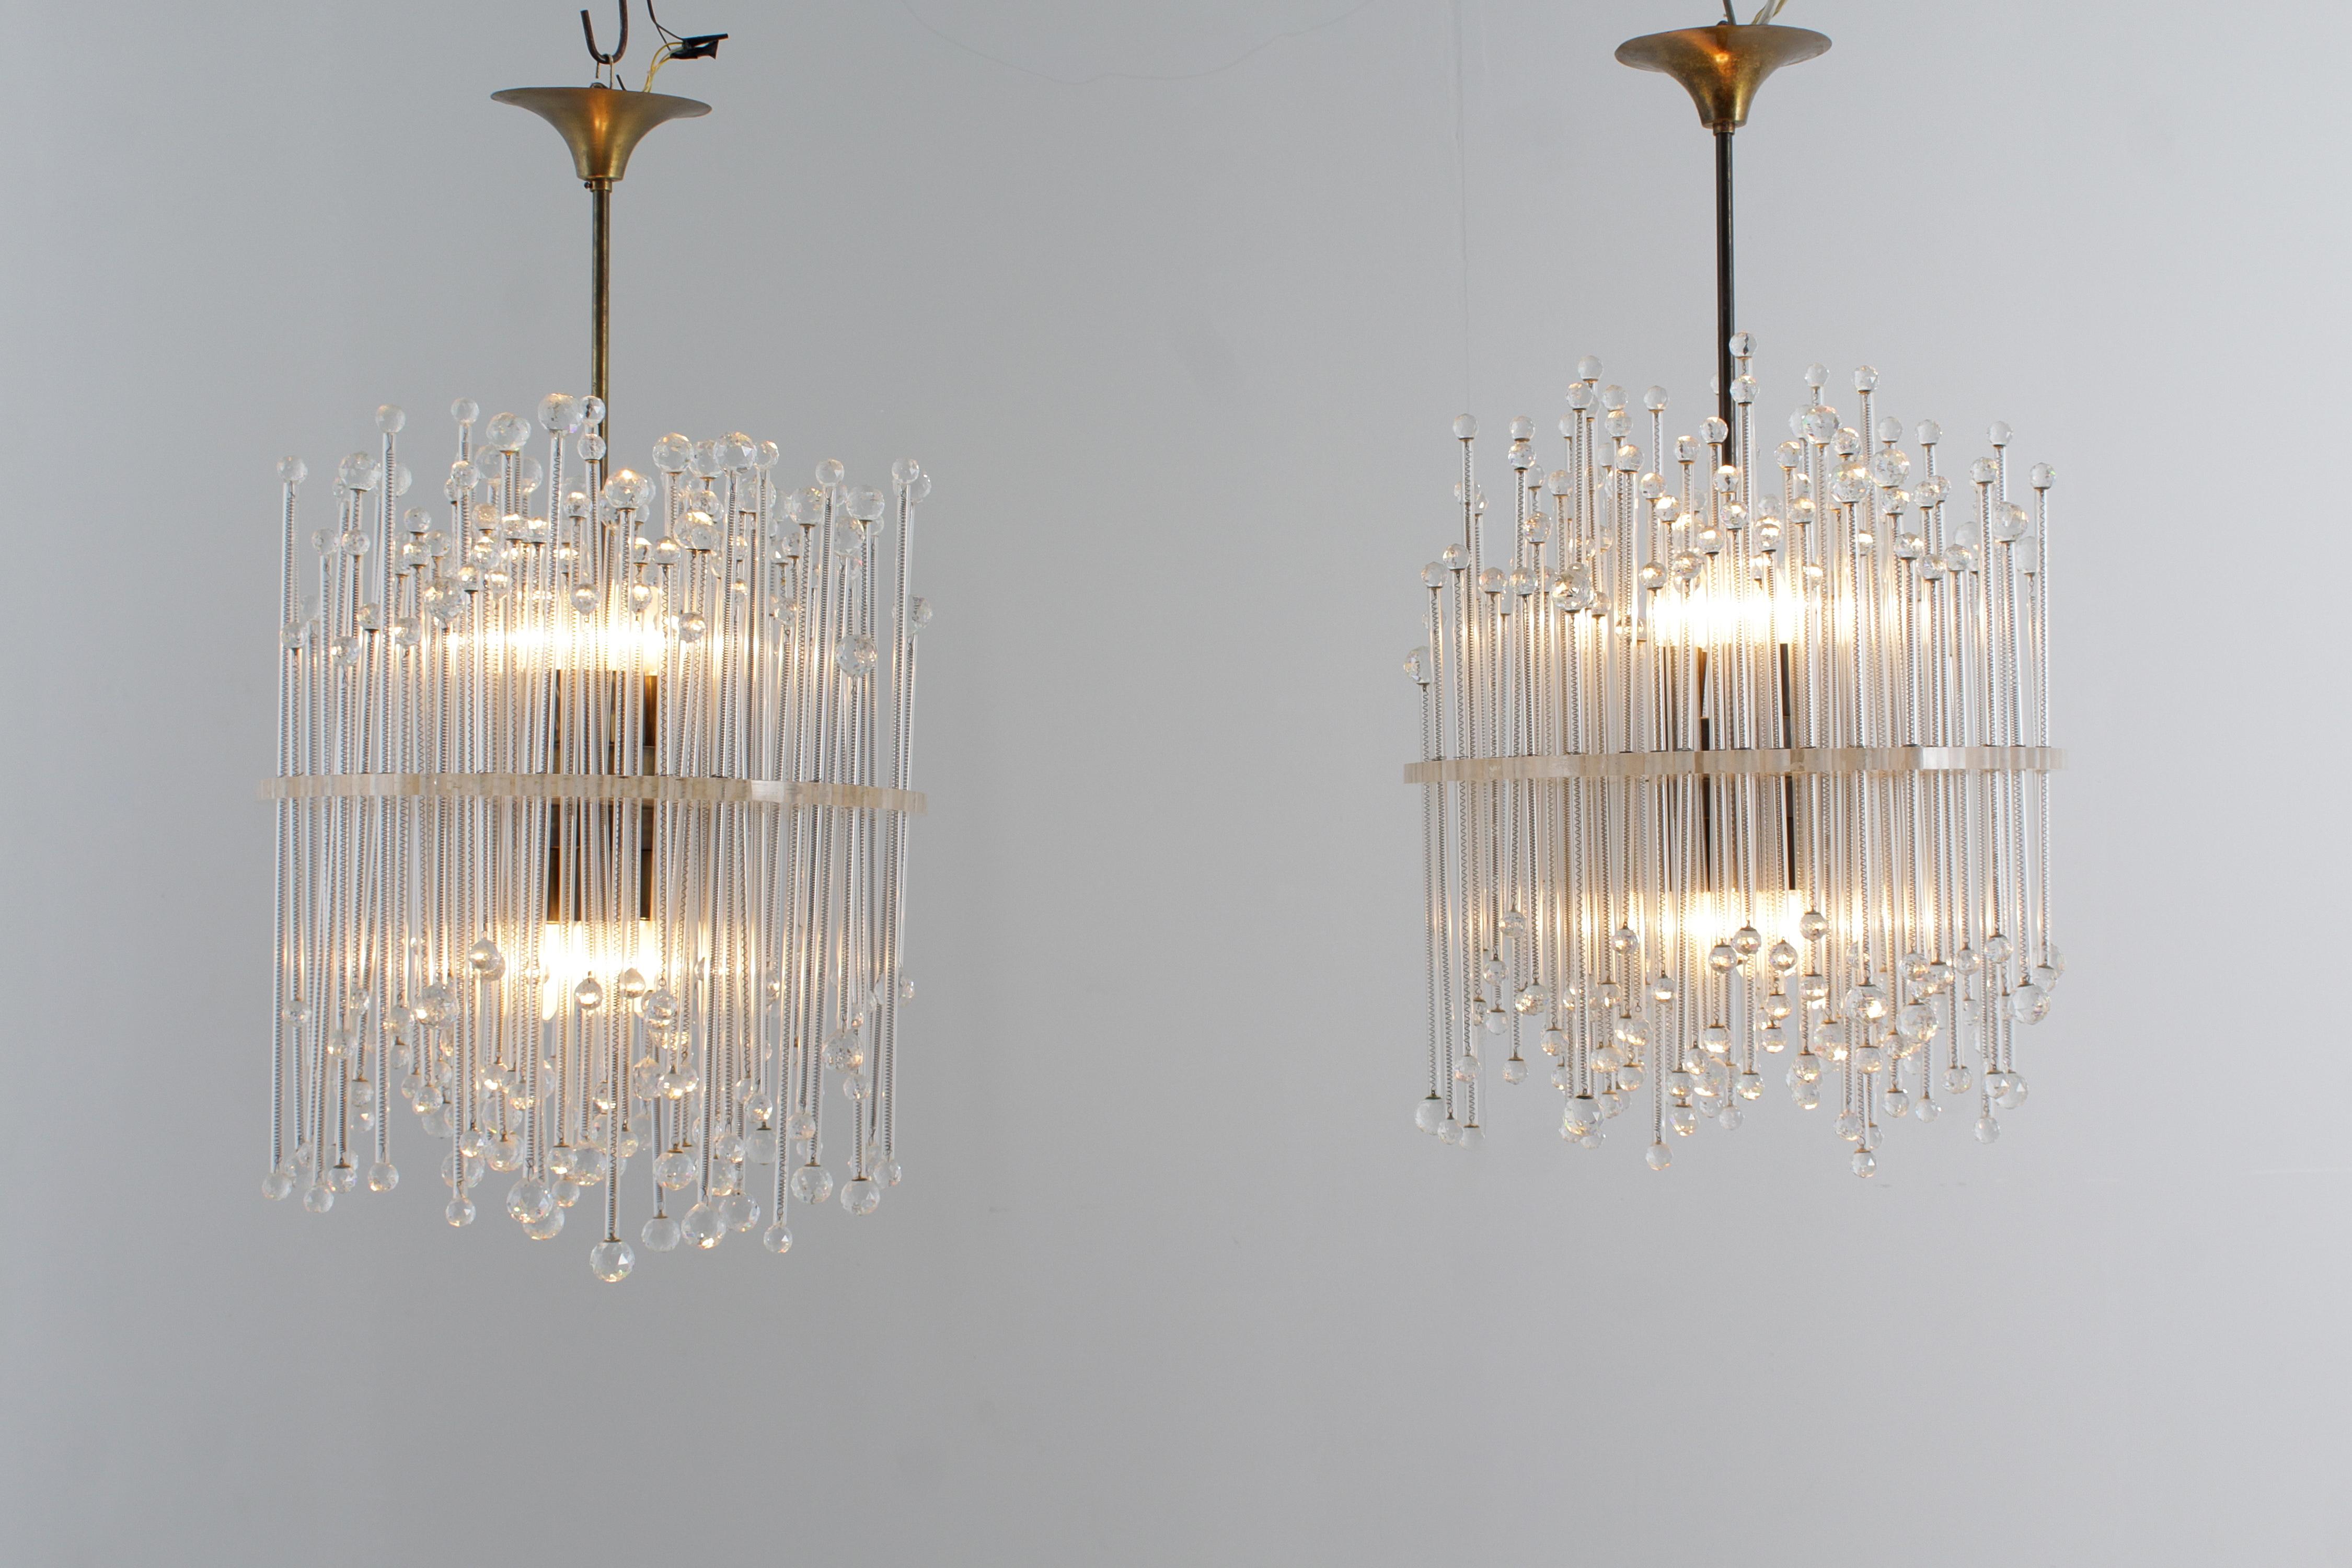 Stunning and impactful pair of glass chandeliers, Italian production from the 1960s.
The chandeliers have a central plexiglass disc with holes that contain transparent glass tubes of different heights, inside which metal wire springs hold two